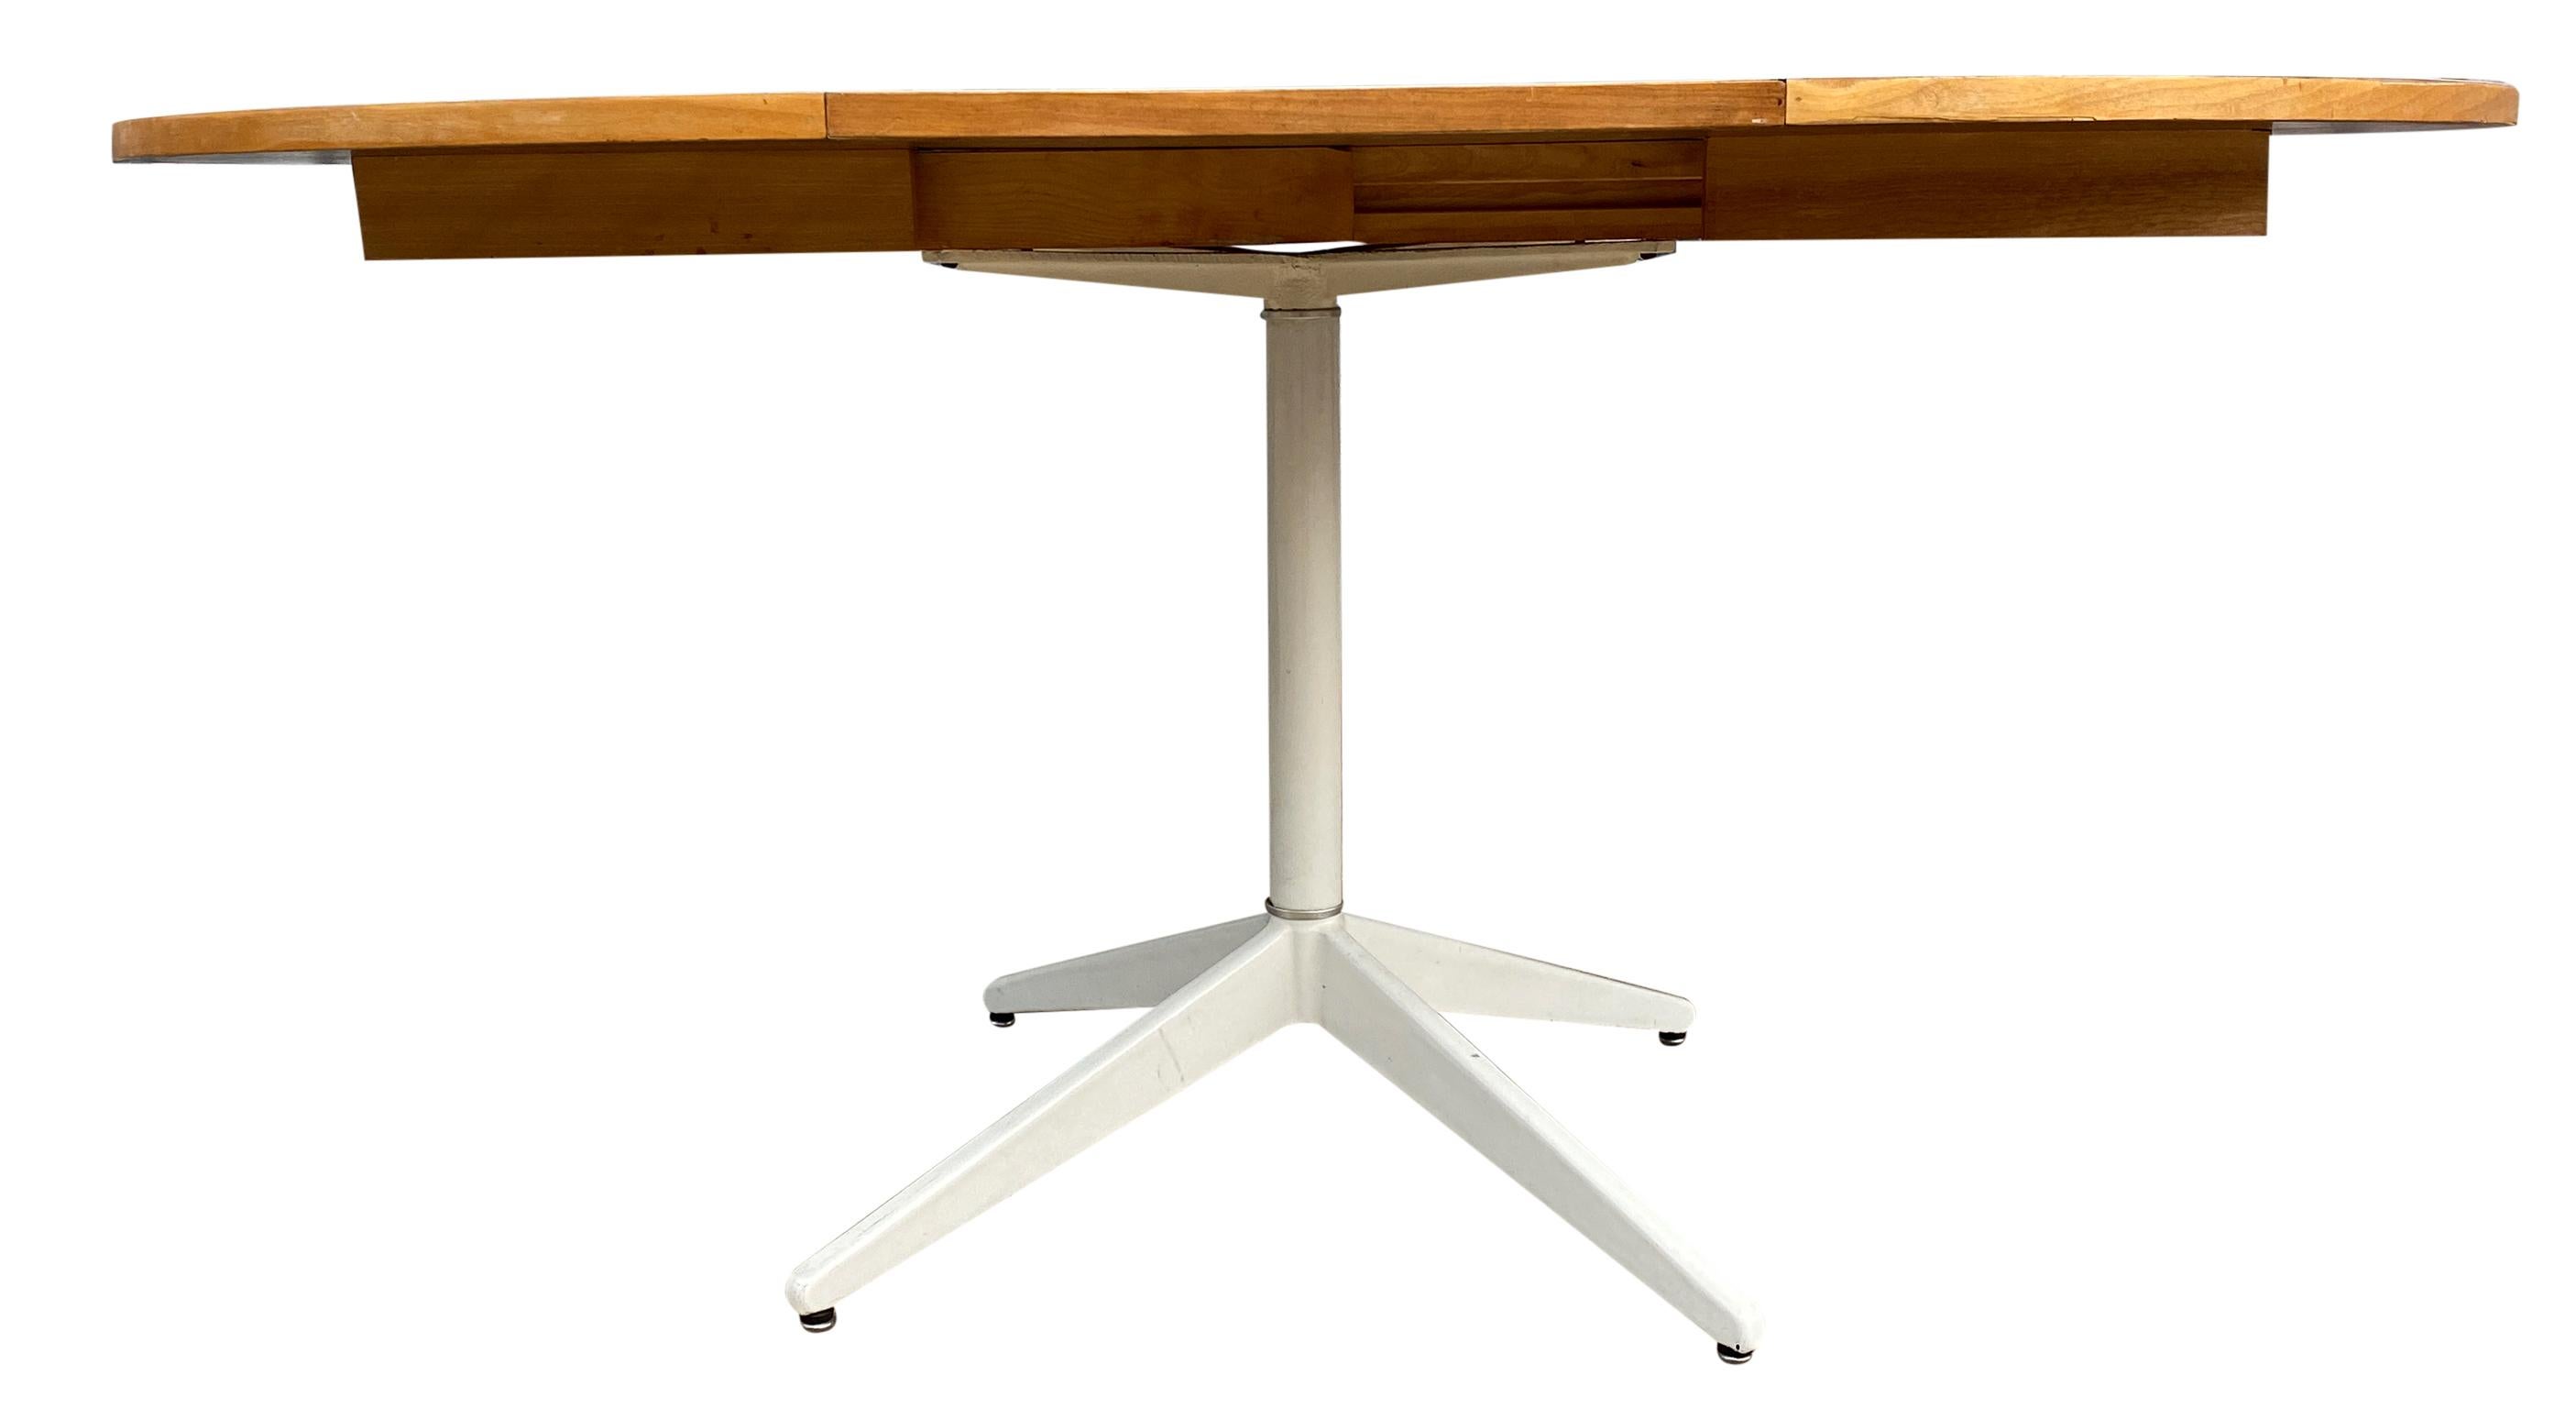 Steel Midcentury George Nelson Herman Miller Expandable Dining Table with 1 Leaf